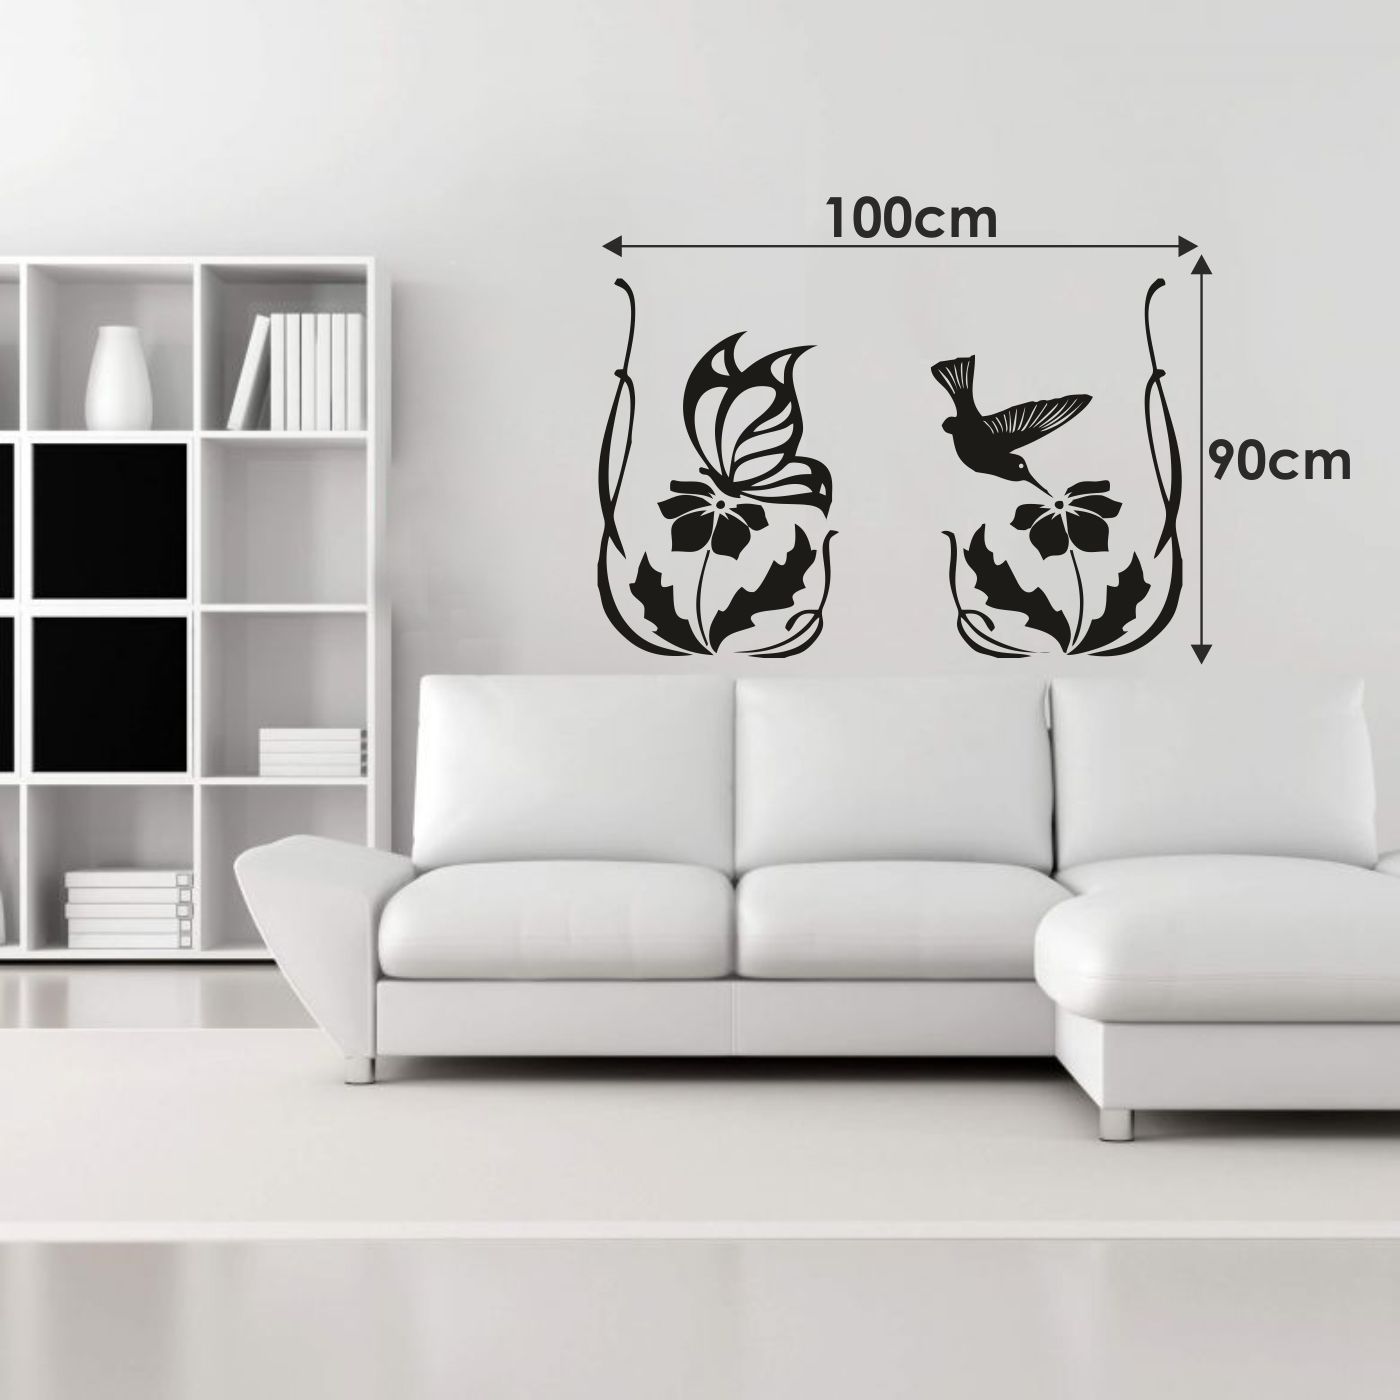 ORKA Butterfly Theme Wall Decal Sticker 7  